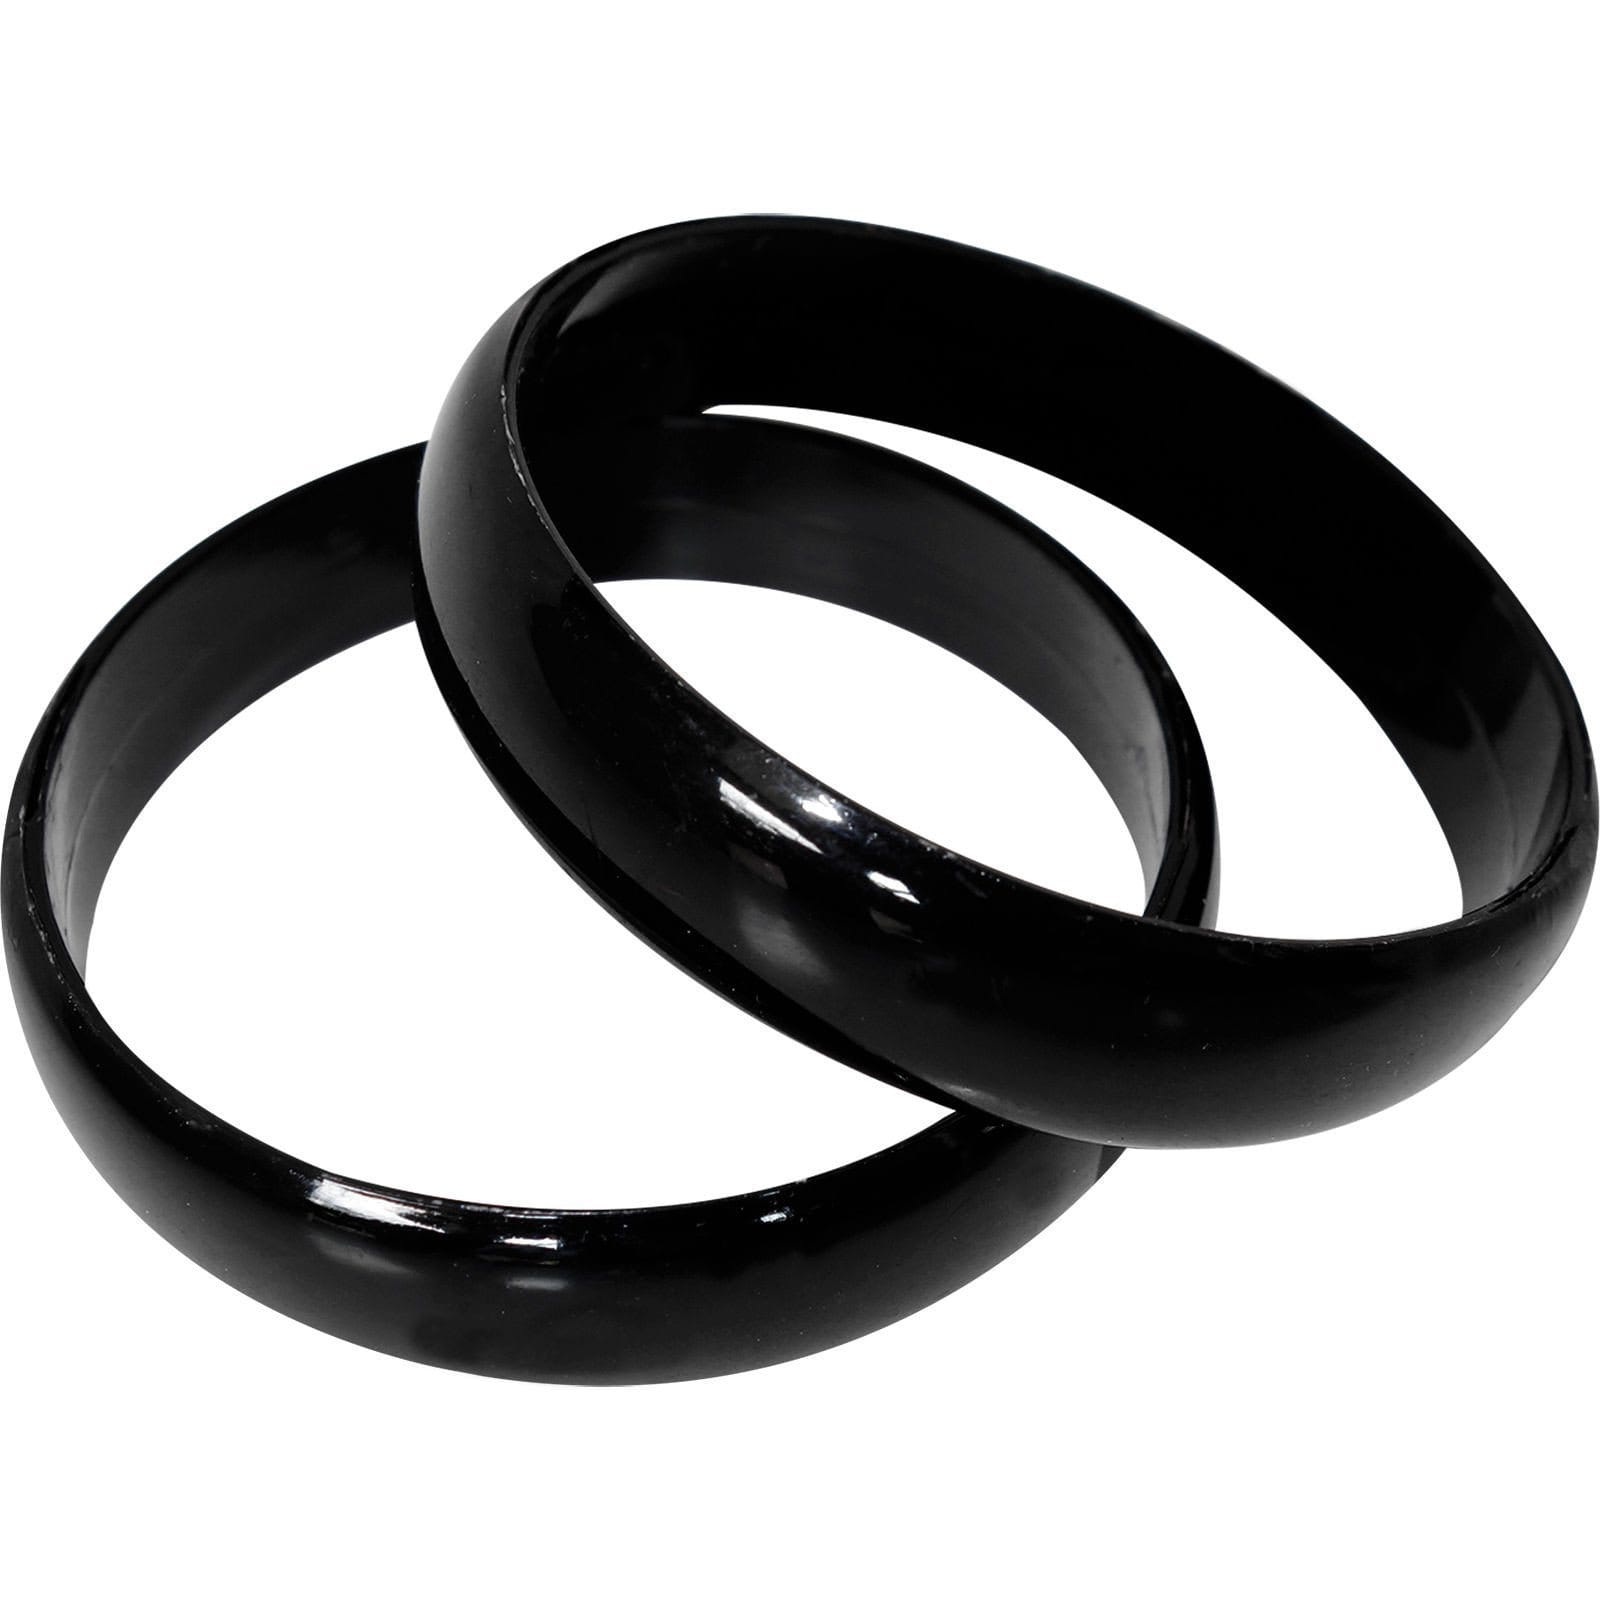 2x10 Pieces/Pack Blank Silicone Wristbands Fashion Rubber Bracelet Black